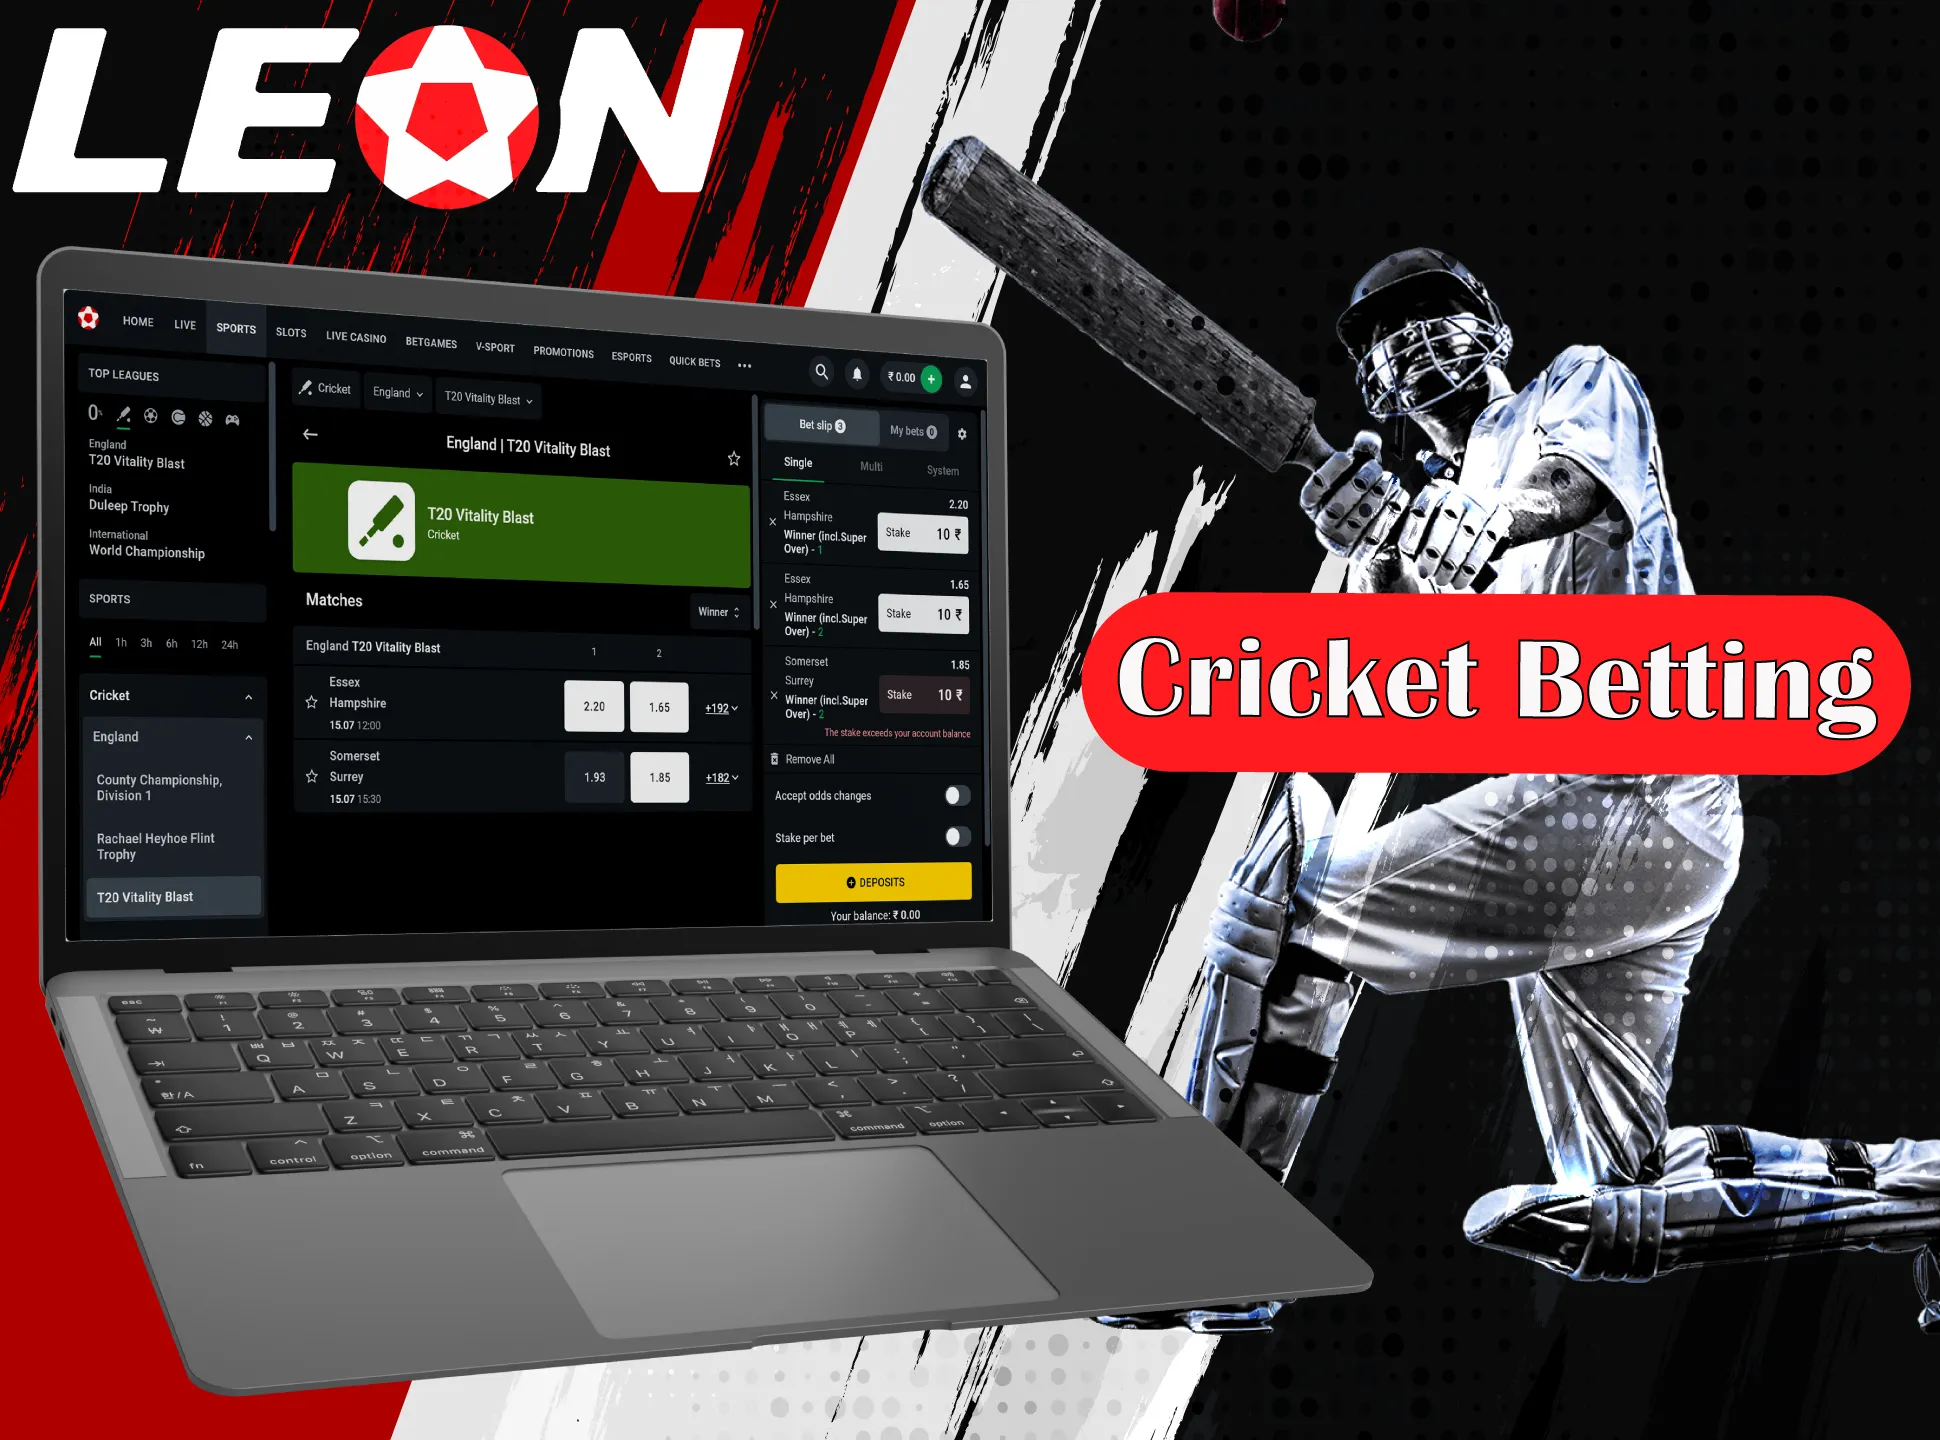 You can find lots of cricket events in the Leonbet sportsbook.